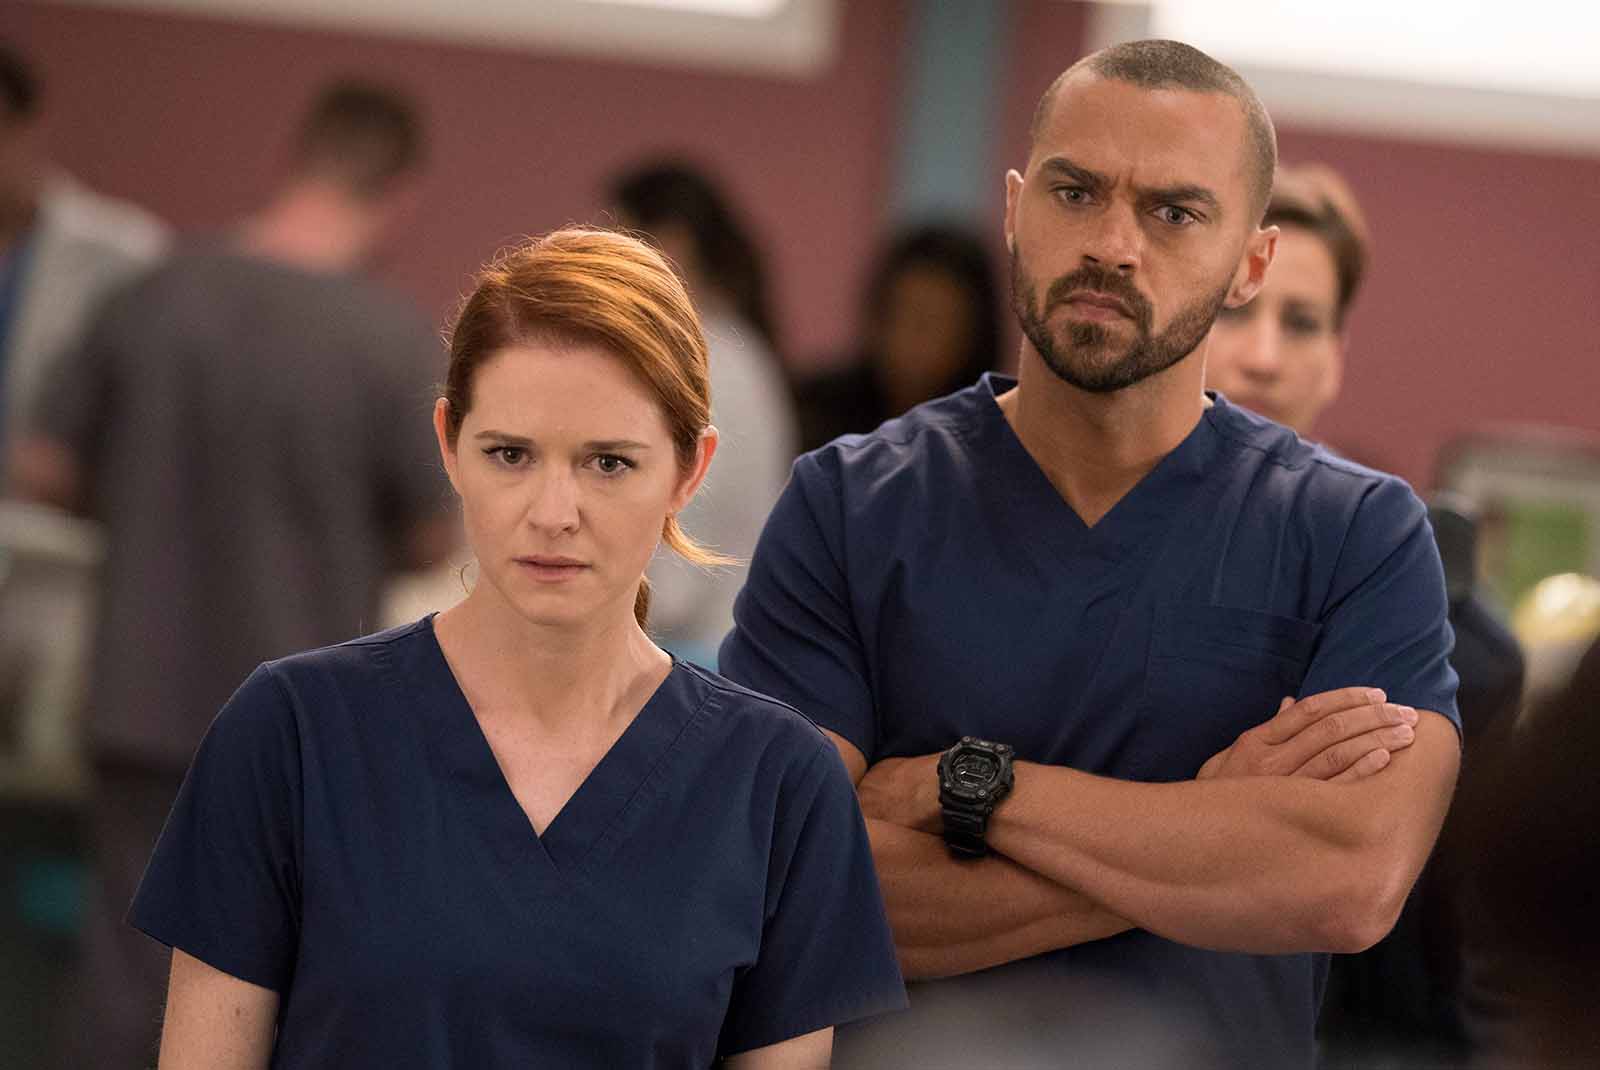 Season 17 of 'Grey's Anatomy' has seen the return of many iconic characters. Peek behind the scenes to see who else is coming back.